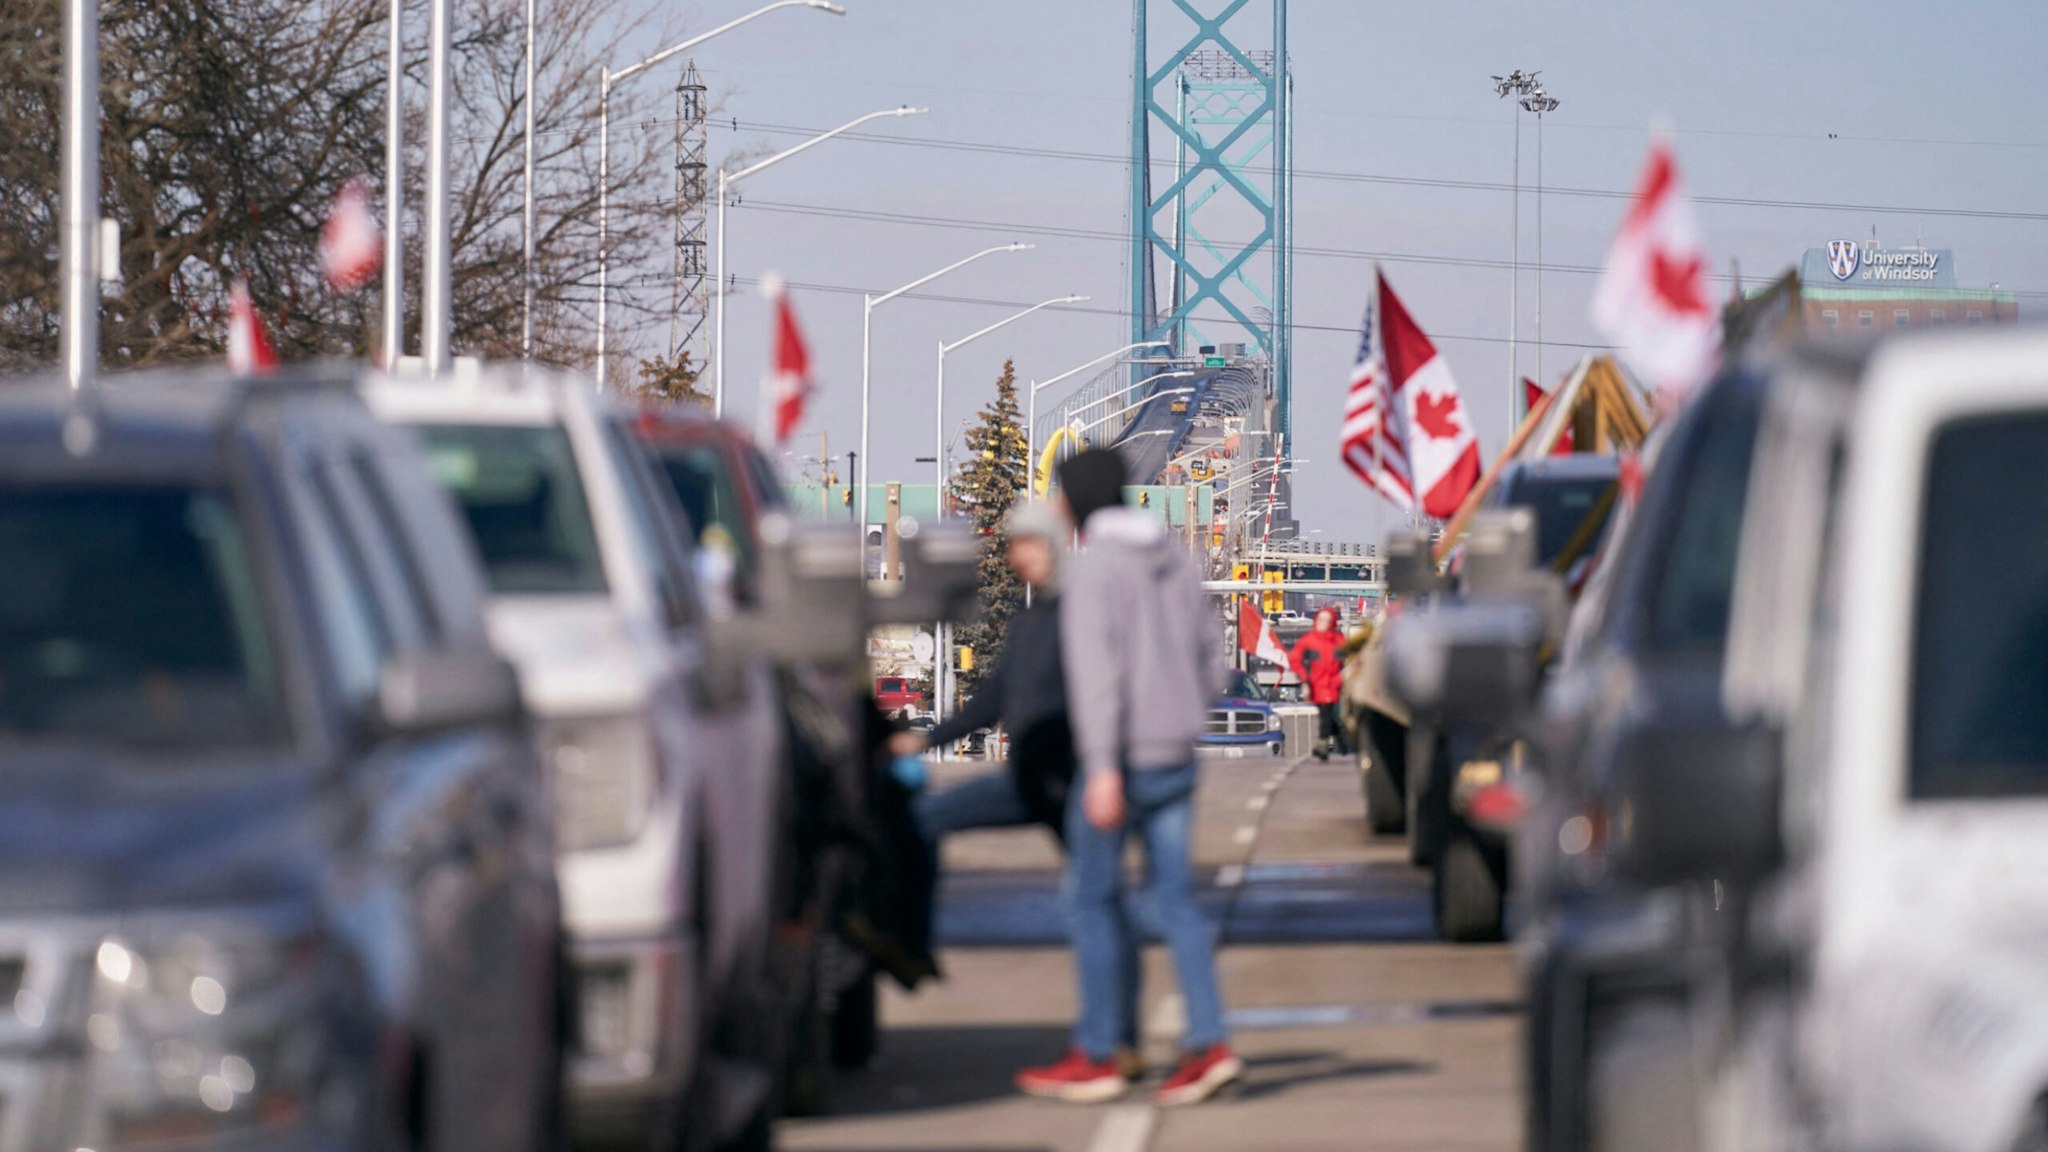 Covid-19 mandate protesters block the roadway at the Ambassador Bridge border crossing with the US, in Windsor, Ontario, on February 9, 2022.